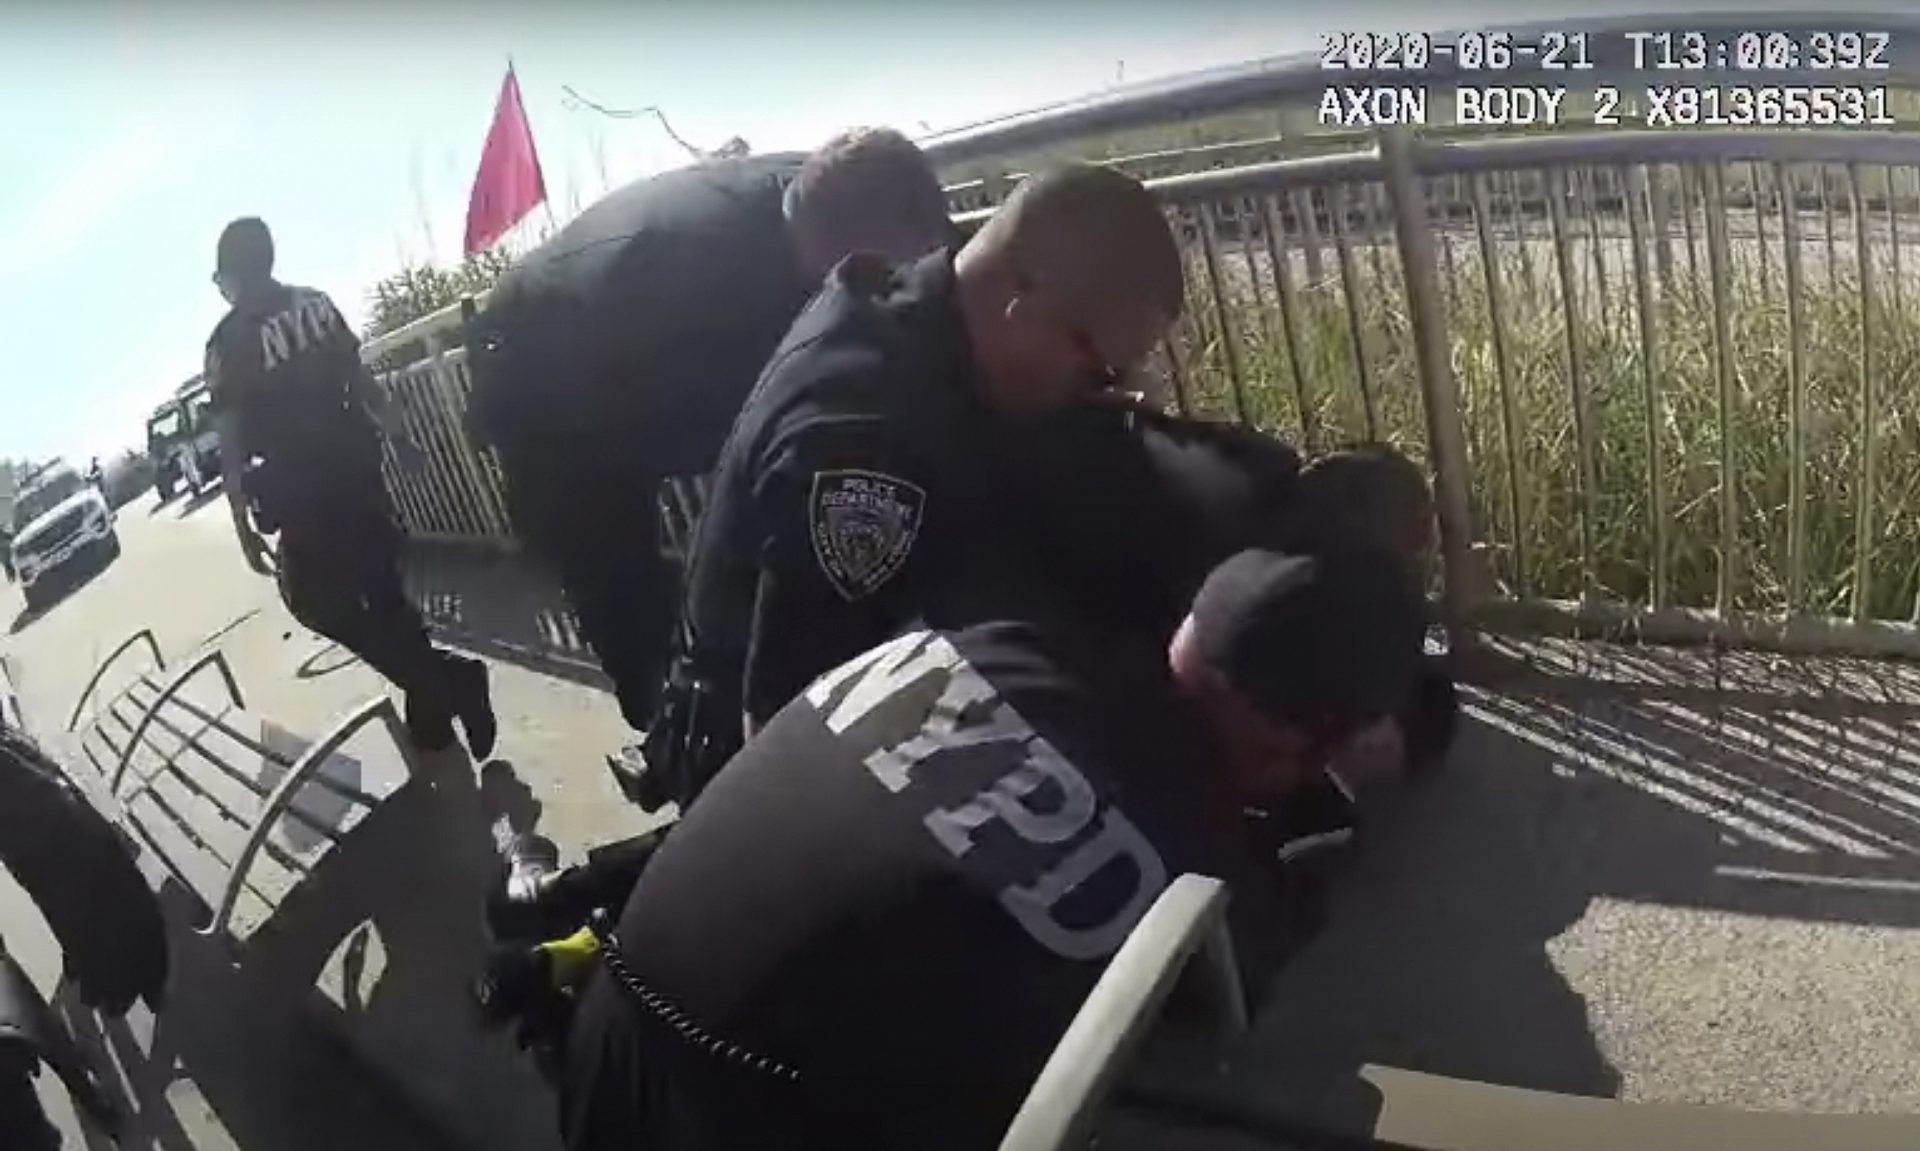 In this June 21, 2020, file image made from police body cam video, New York Police officers arrest a man on a boardwalk in New York. The man whose takedown by police, as shown in this photo, led to an officer being charged for using what officials said was an illegal chokehold. On Thursday, Sept. 17, 2020, a federal appeals court agreed to keep the release of New York City police disciplinary records on pause while public safety unions fight a lower-court decision that had cleared the way for their disclosure.